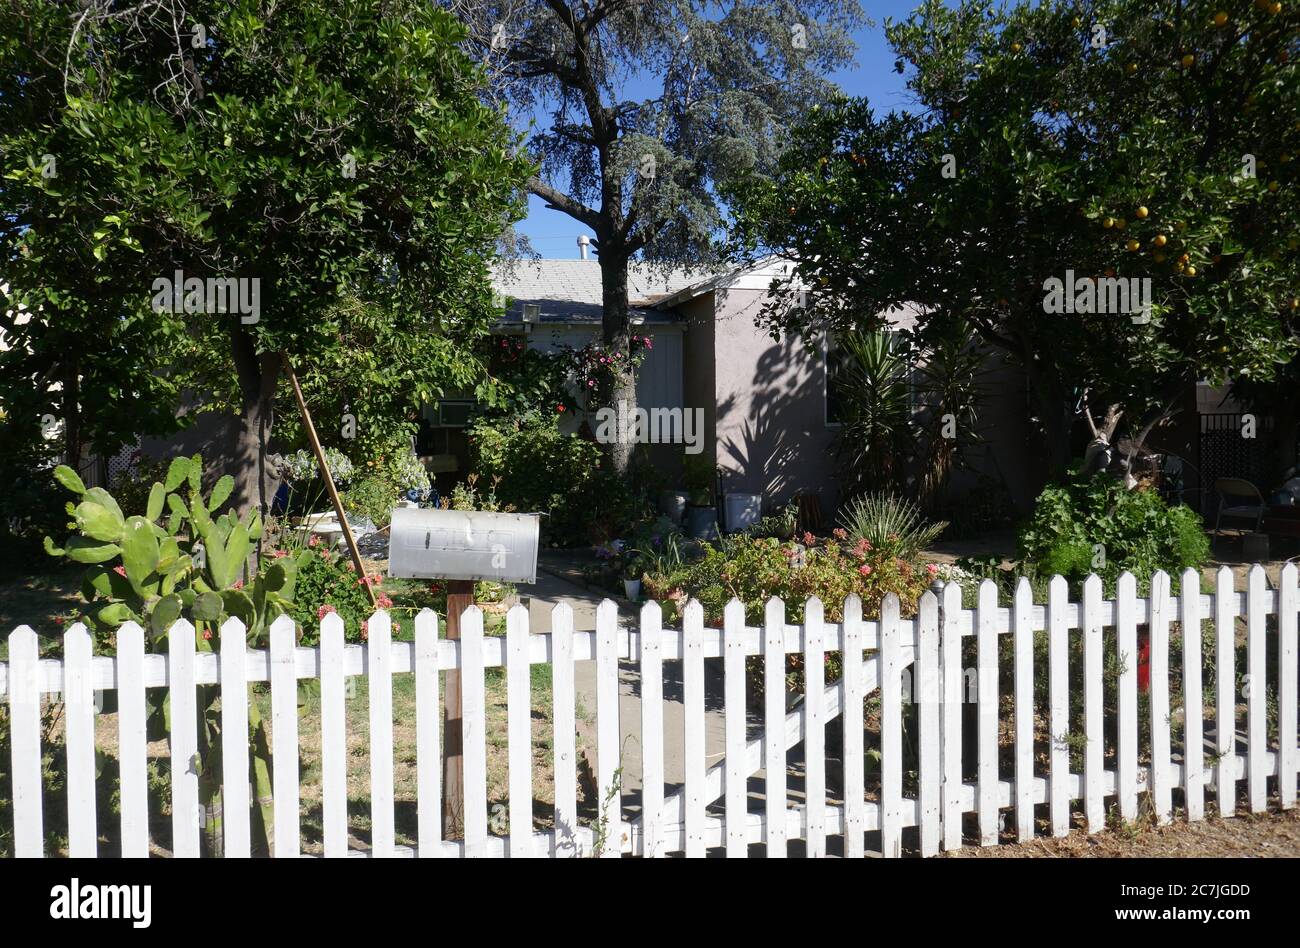 Pacoima, California, USA 17th July 2020 A general view of atmosphere of Ritchie Valen's former home on July 17, 2020 at 13428 W. Remington Street in Pacoima, California, USA. Photo by Barry King/Alamy Stock Photo Stock Photo